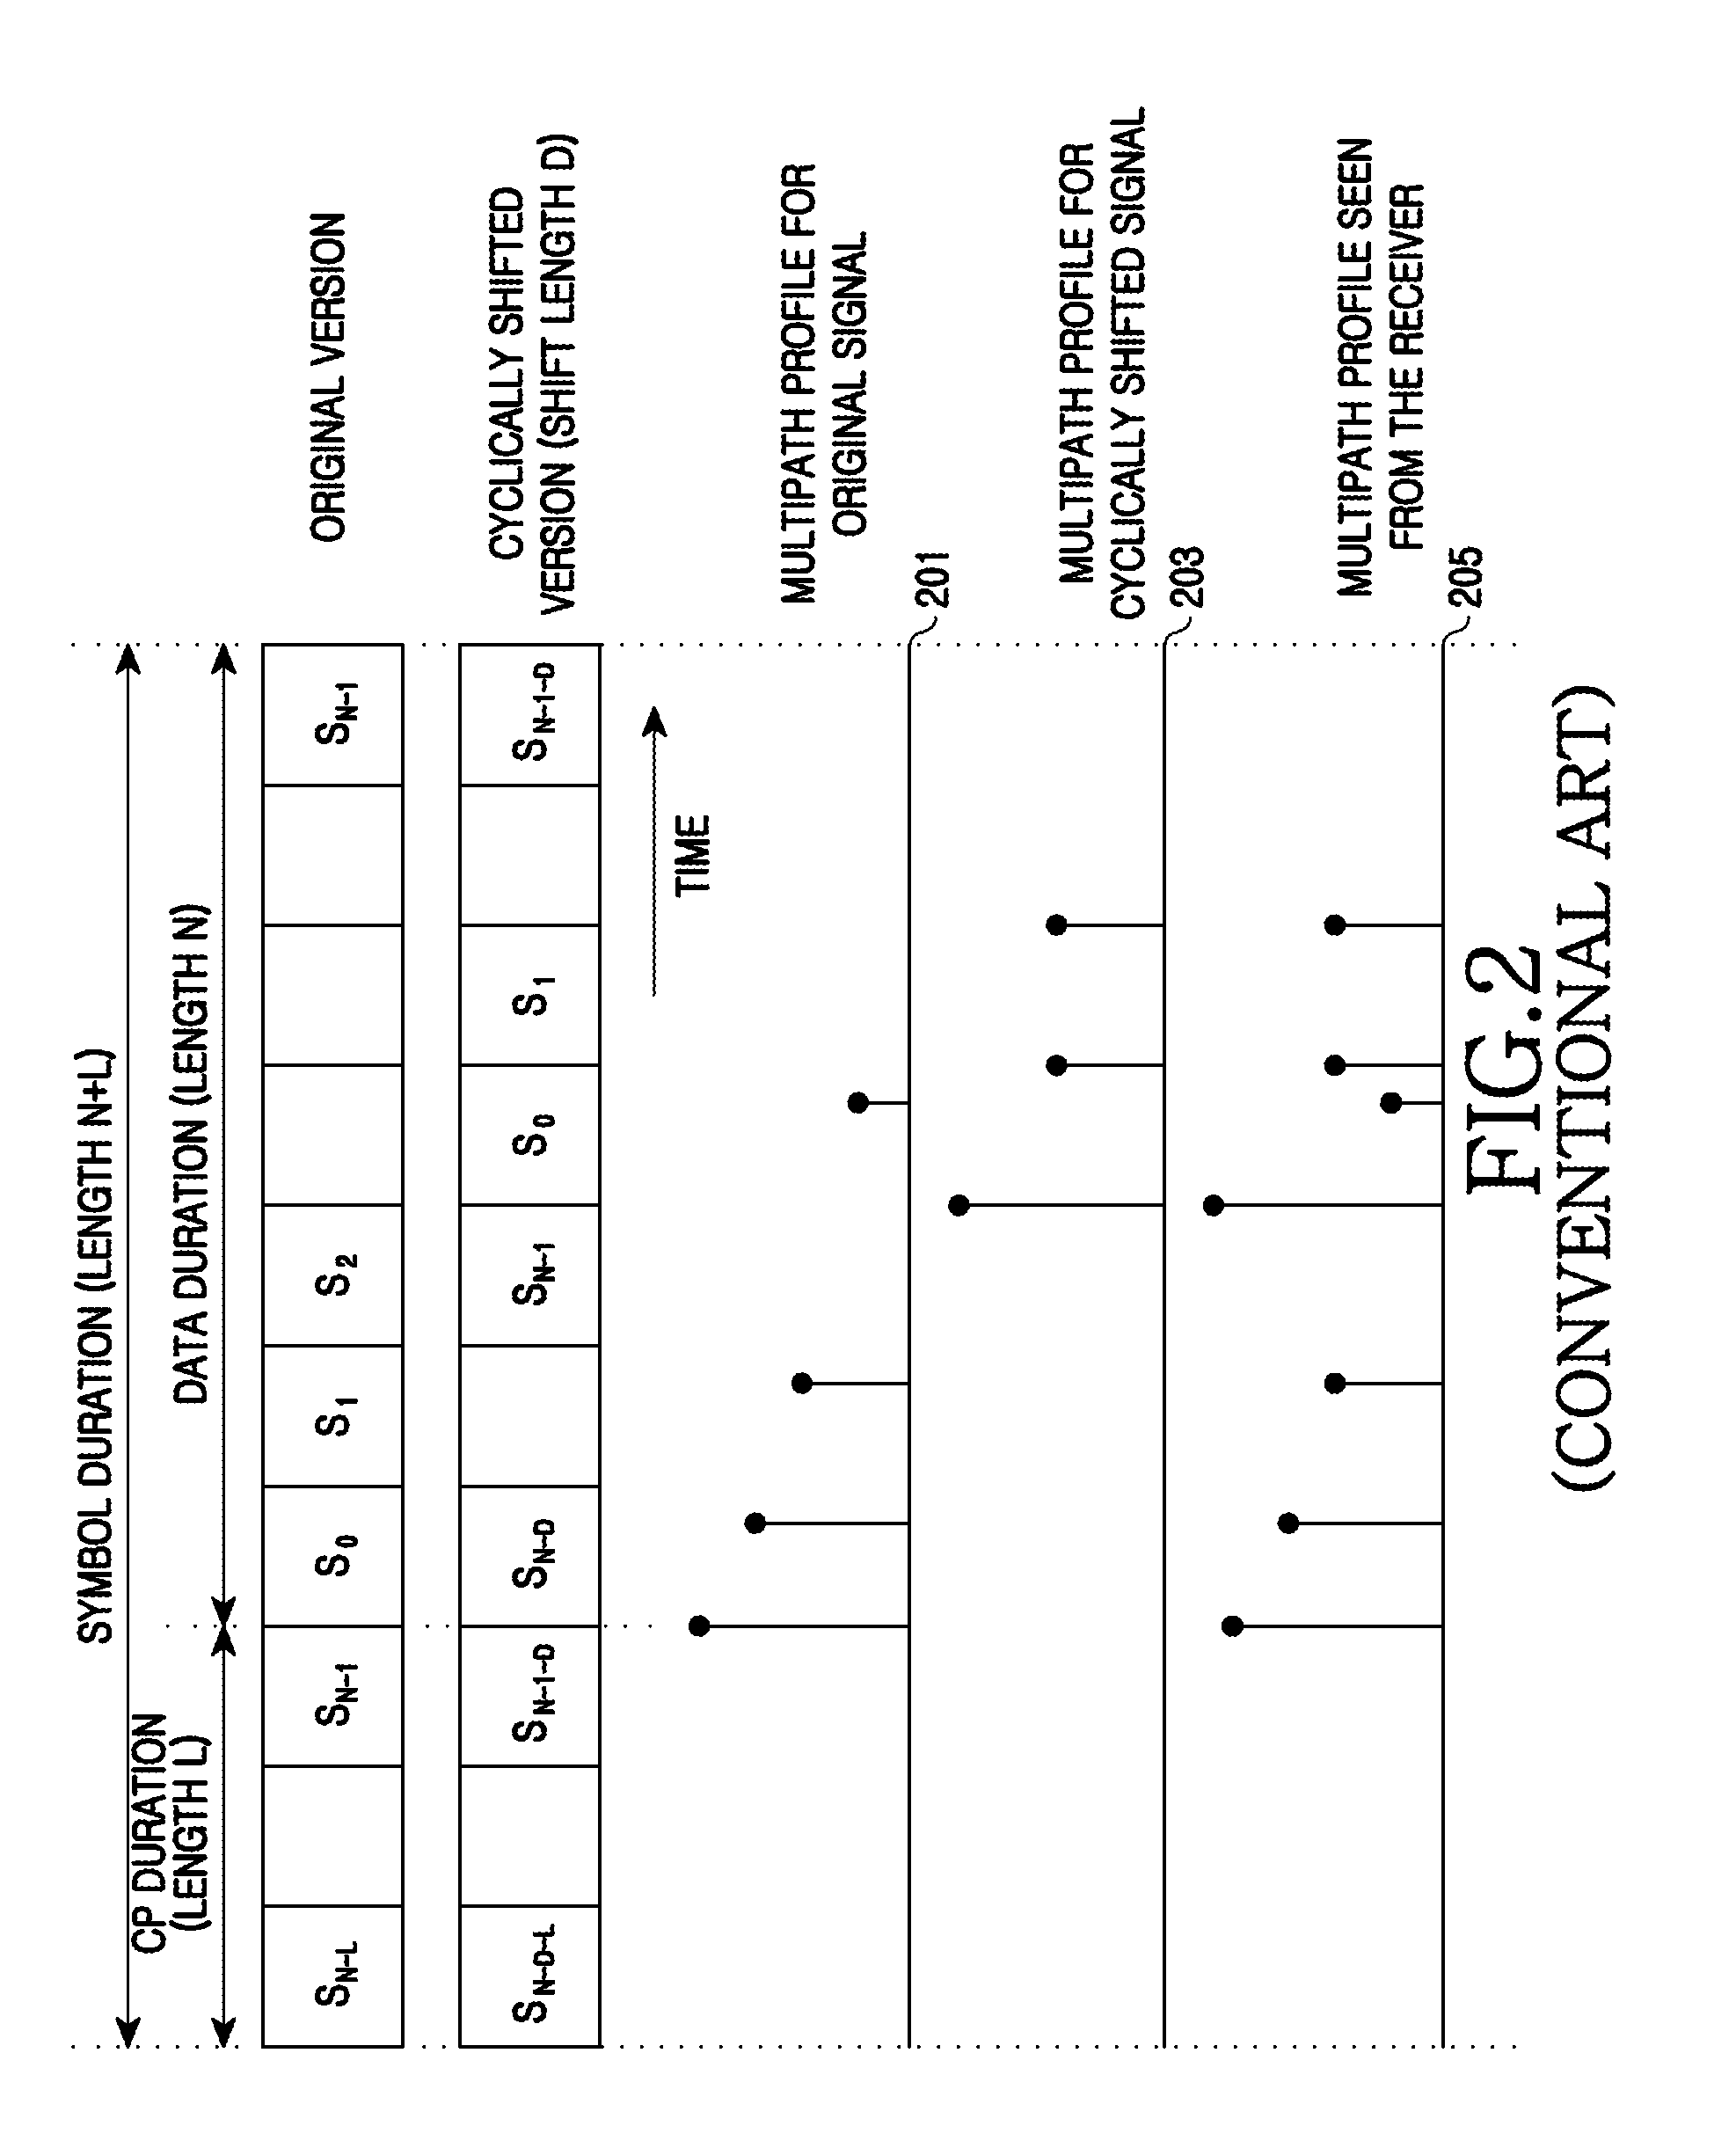 Apparatus and method for time-varying cyclic delay diversity in a wireless communication system